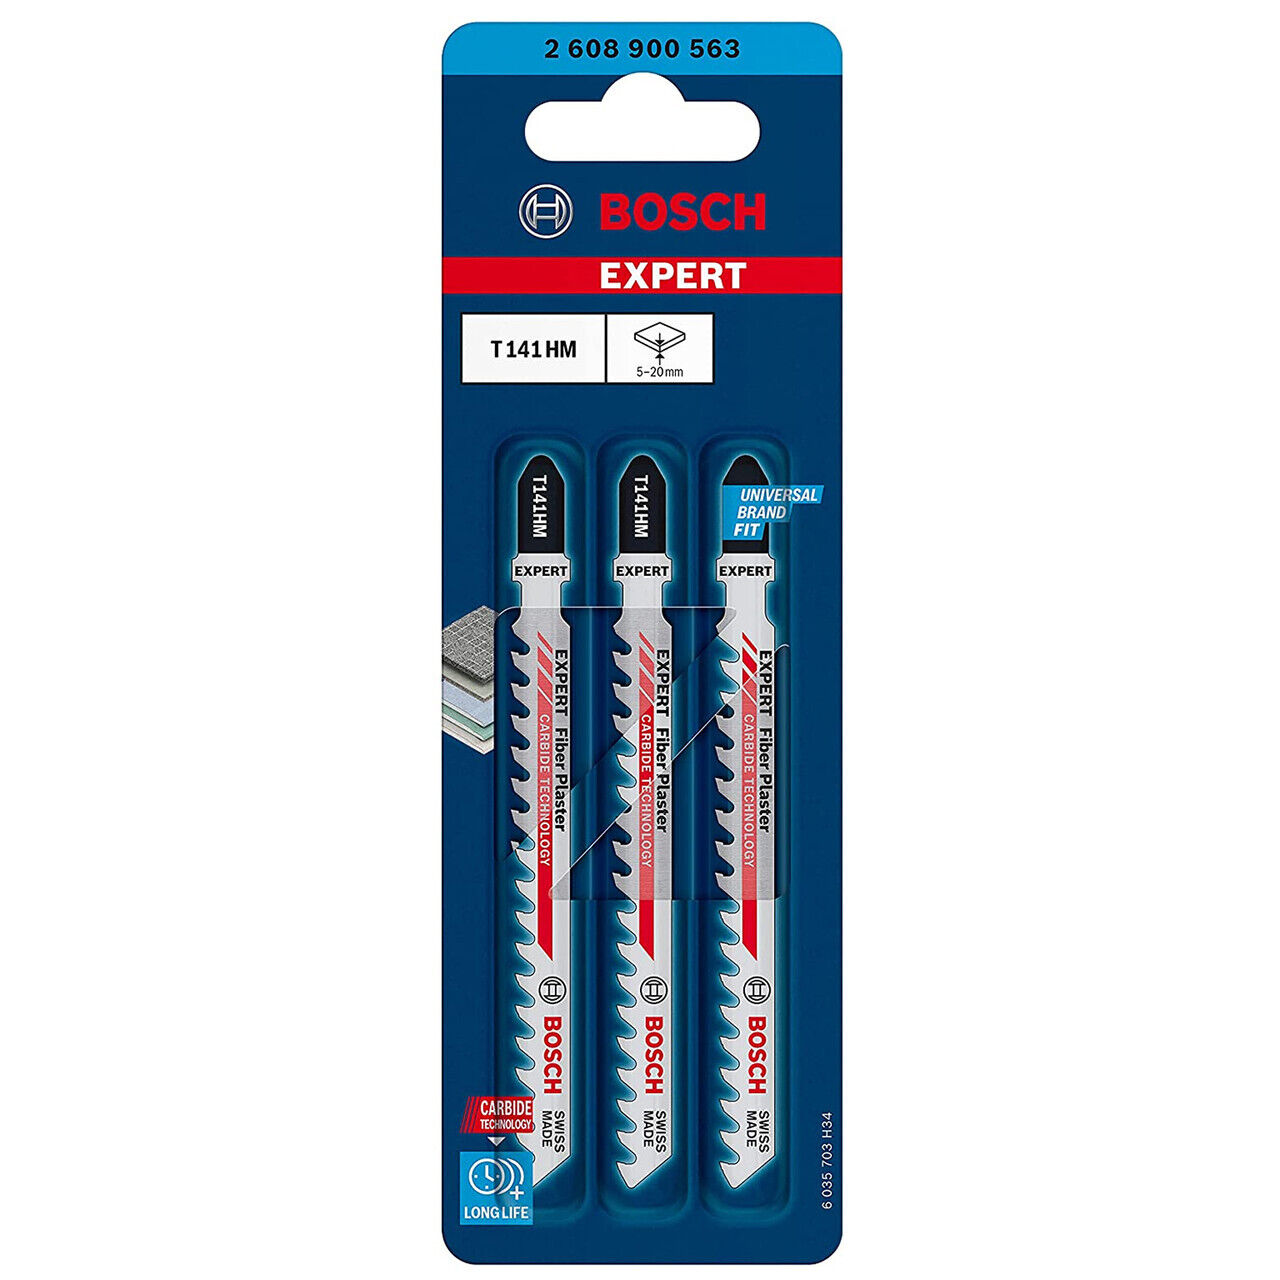 Bosch Jigsaw Blades HM/TC T 141 HM Special for Fiber and Plaster 3 Pack 2608900563 Power Tool Services